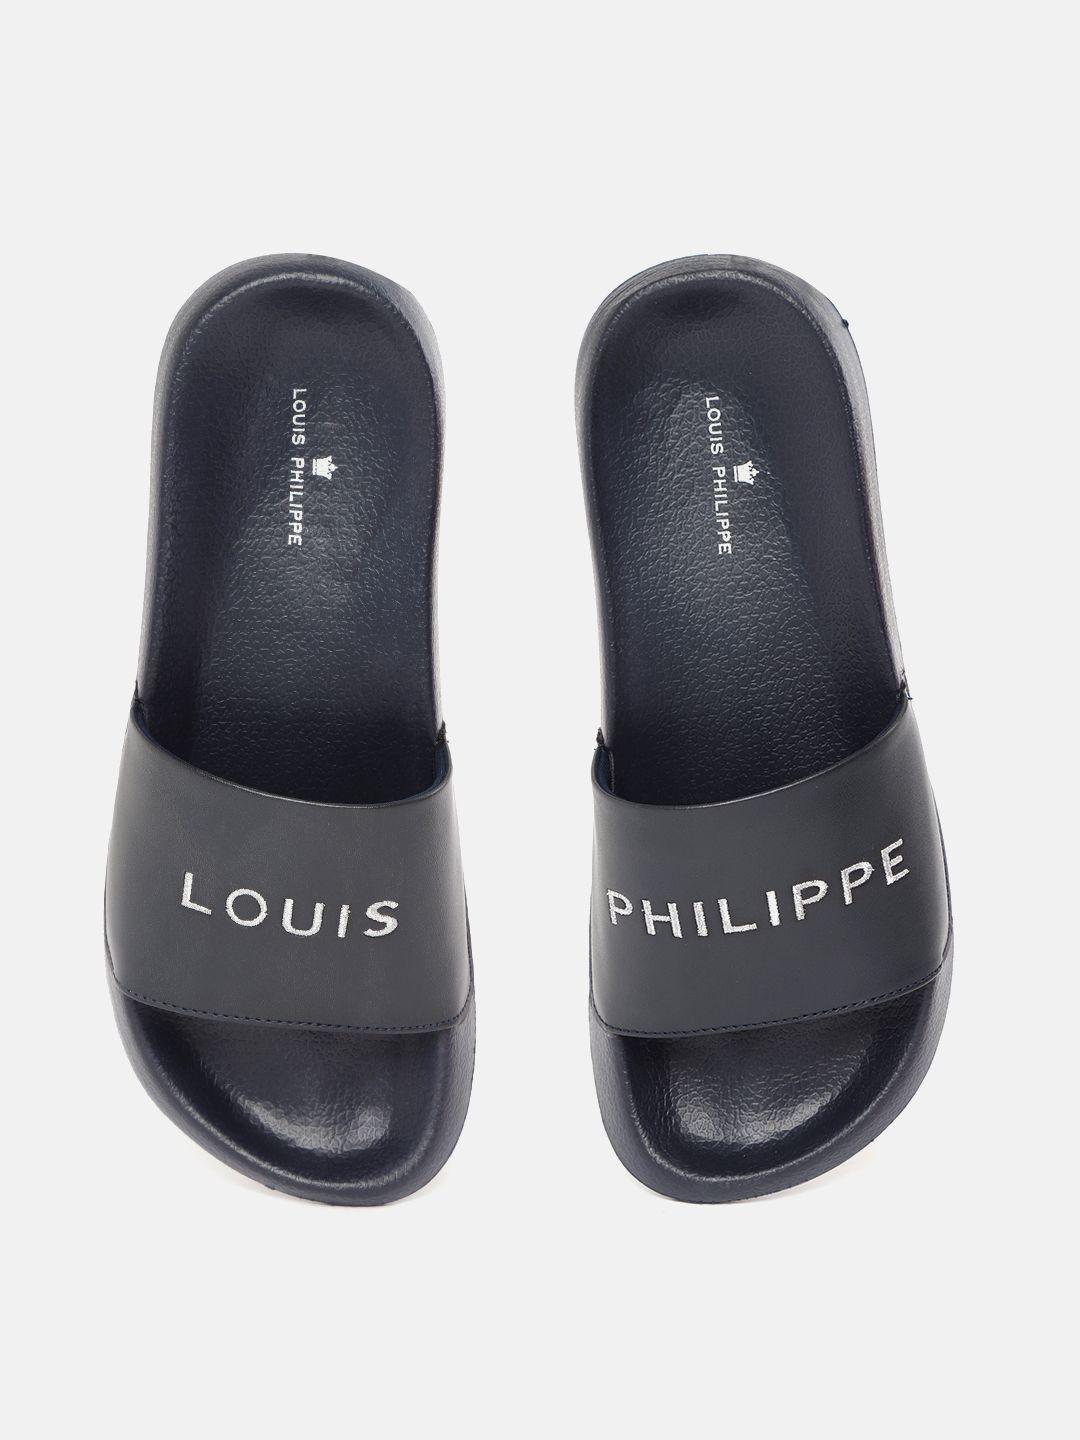 louis philippe men navy blue & silver-toned brand logo embroidered sliders